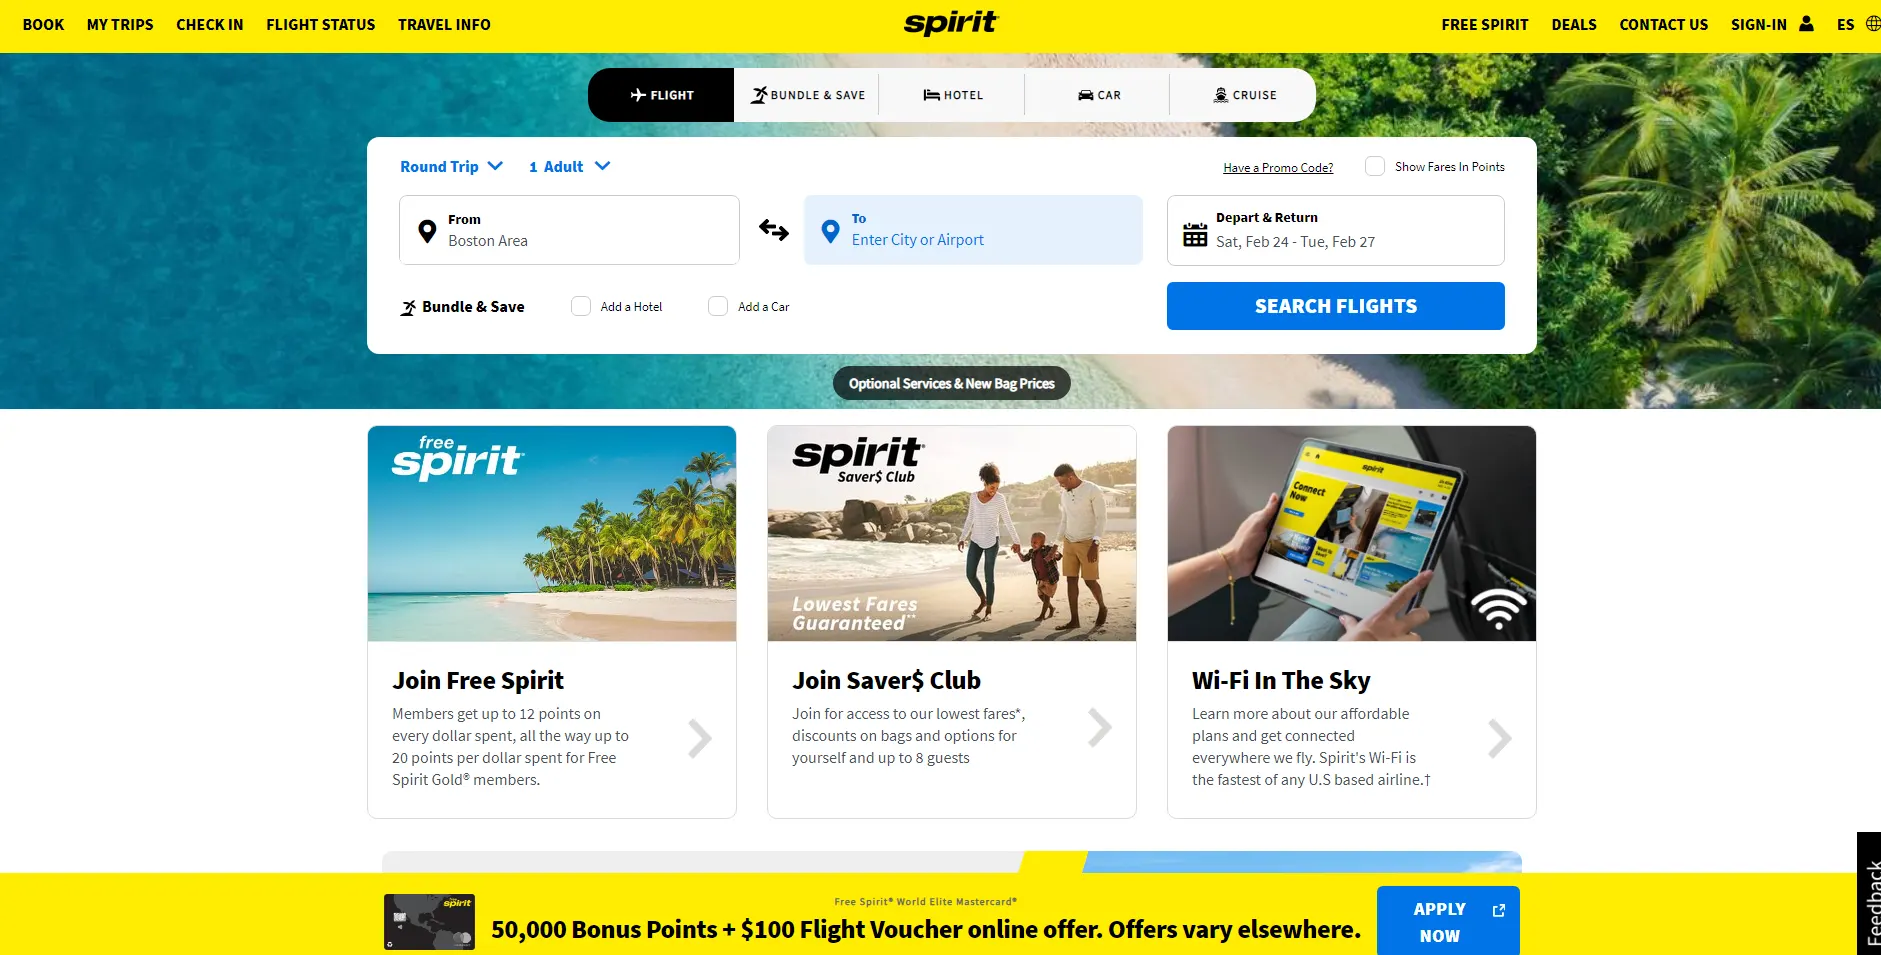 What are the steps to purchase Spirit Airlines points?